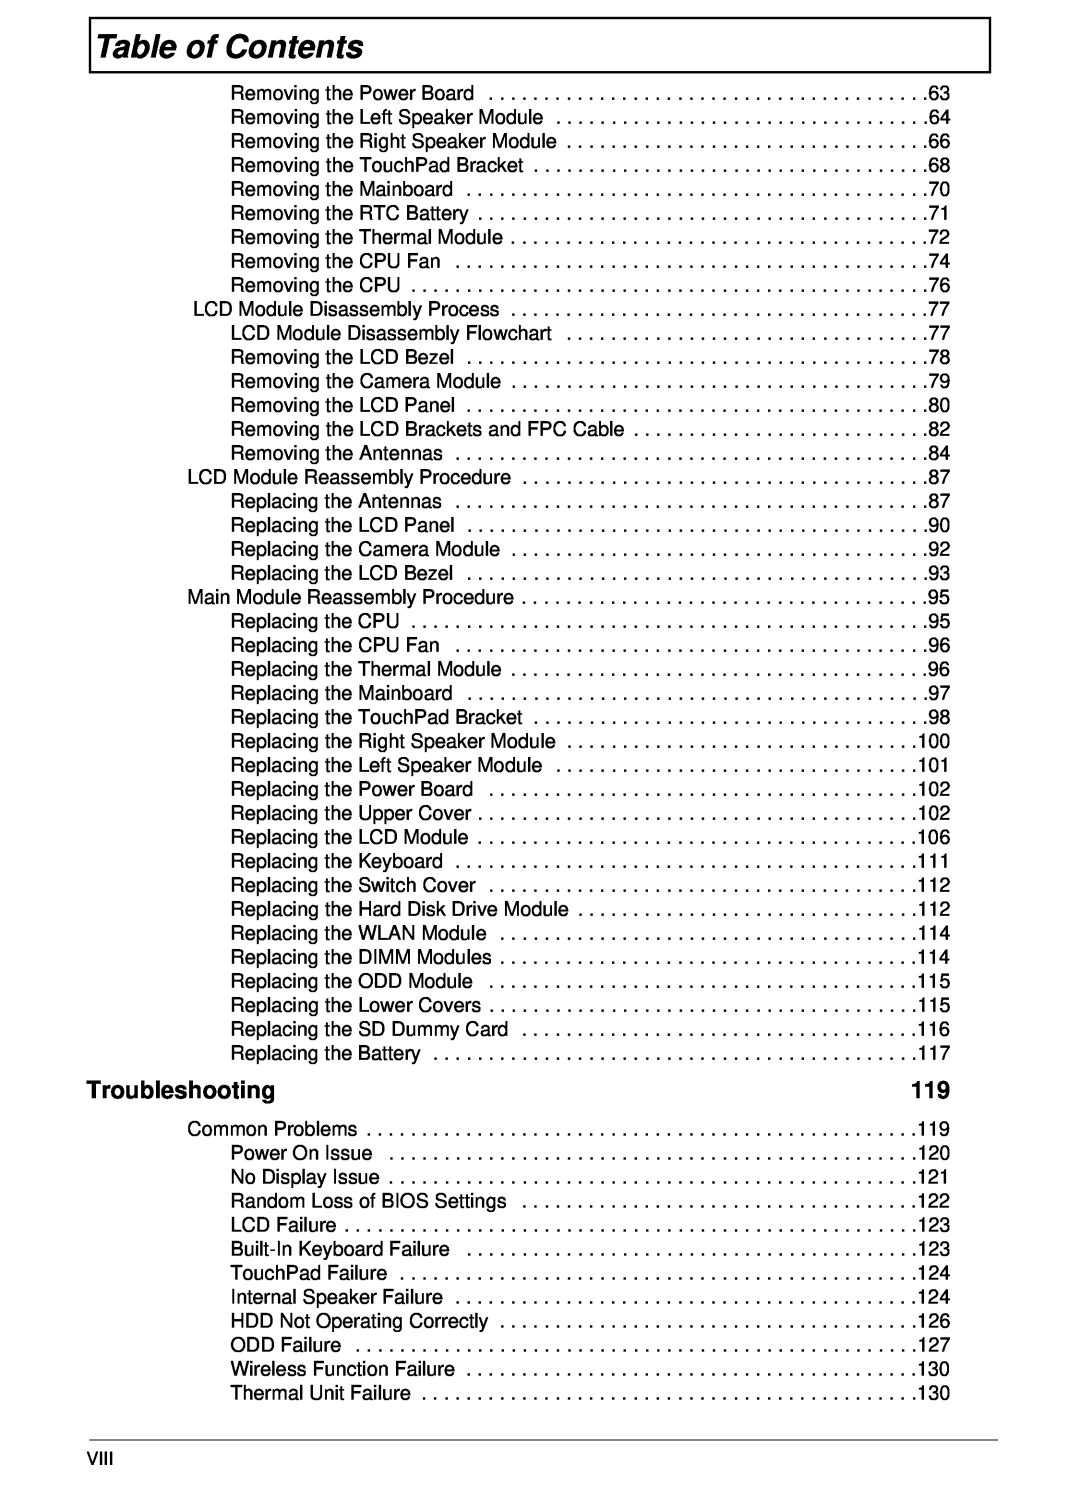 Acer 5532 manual Table of Contents, Troubleshooting 